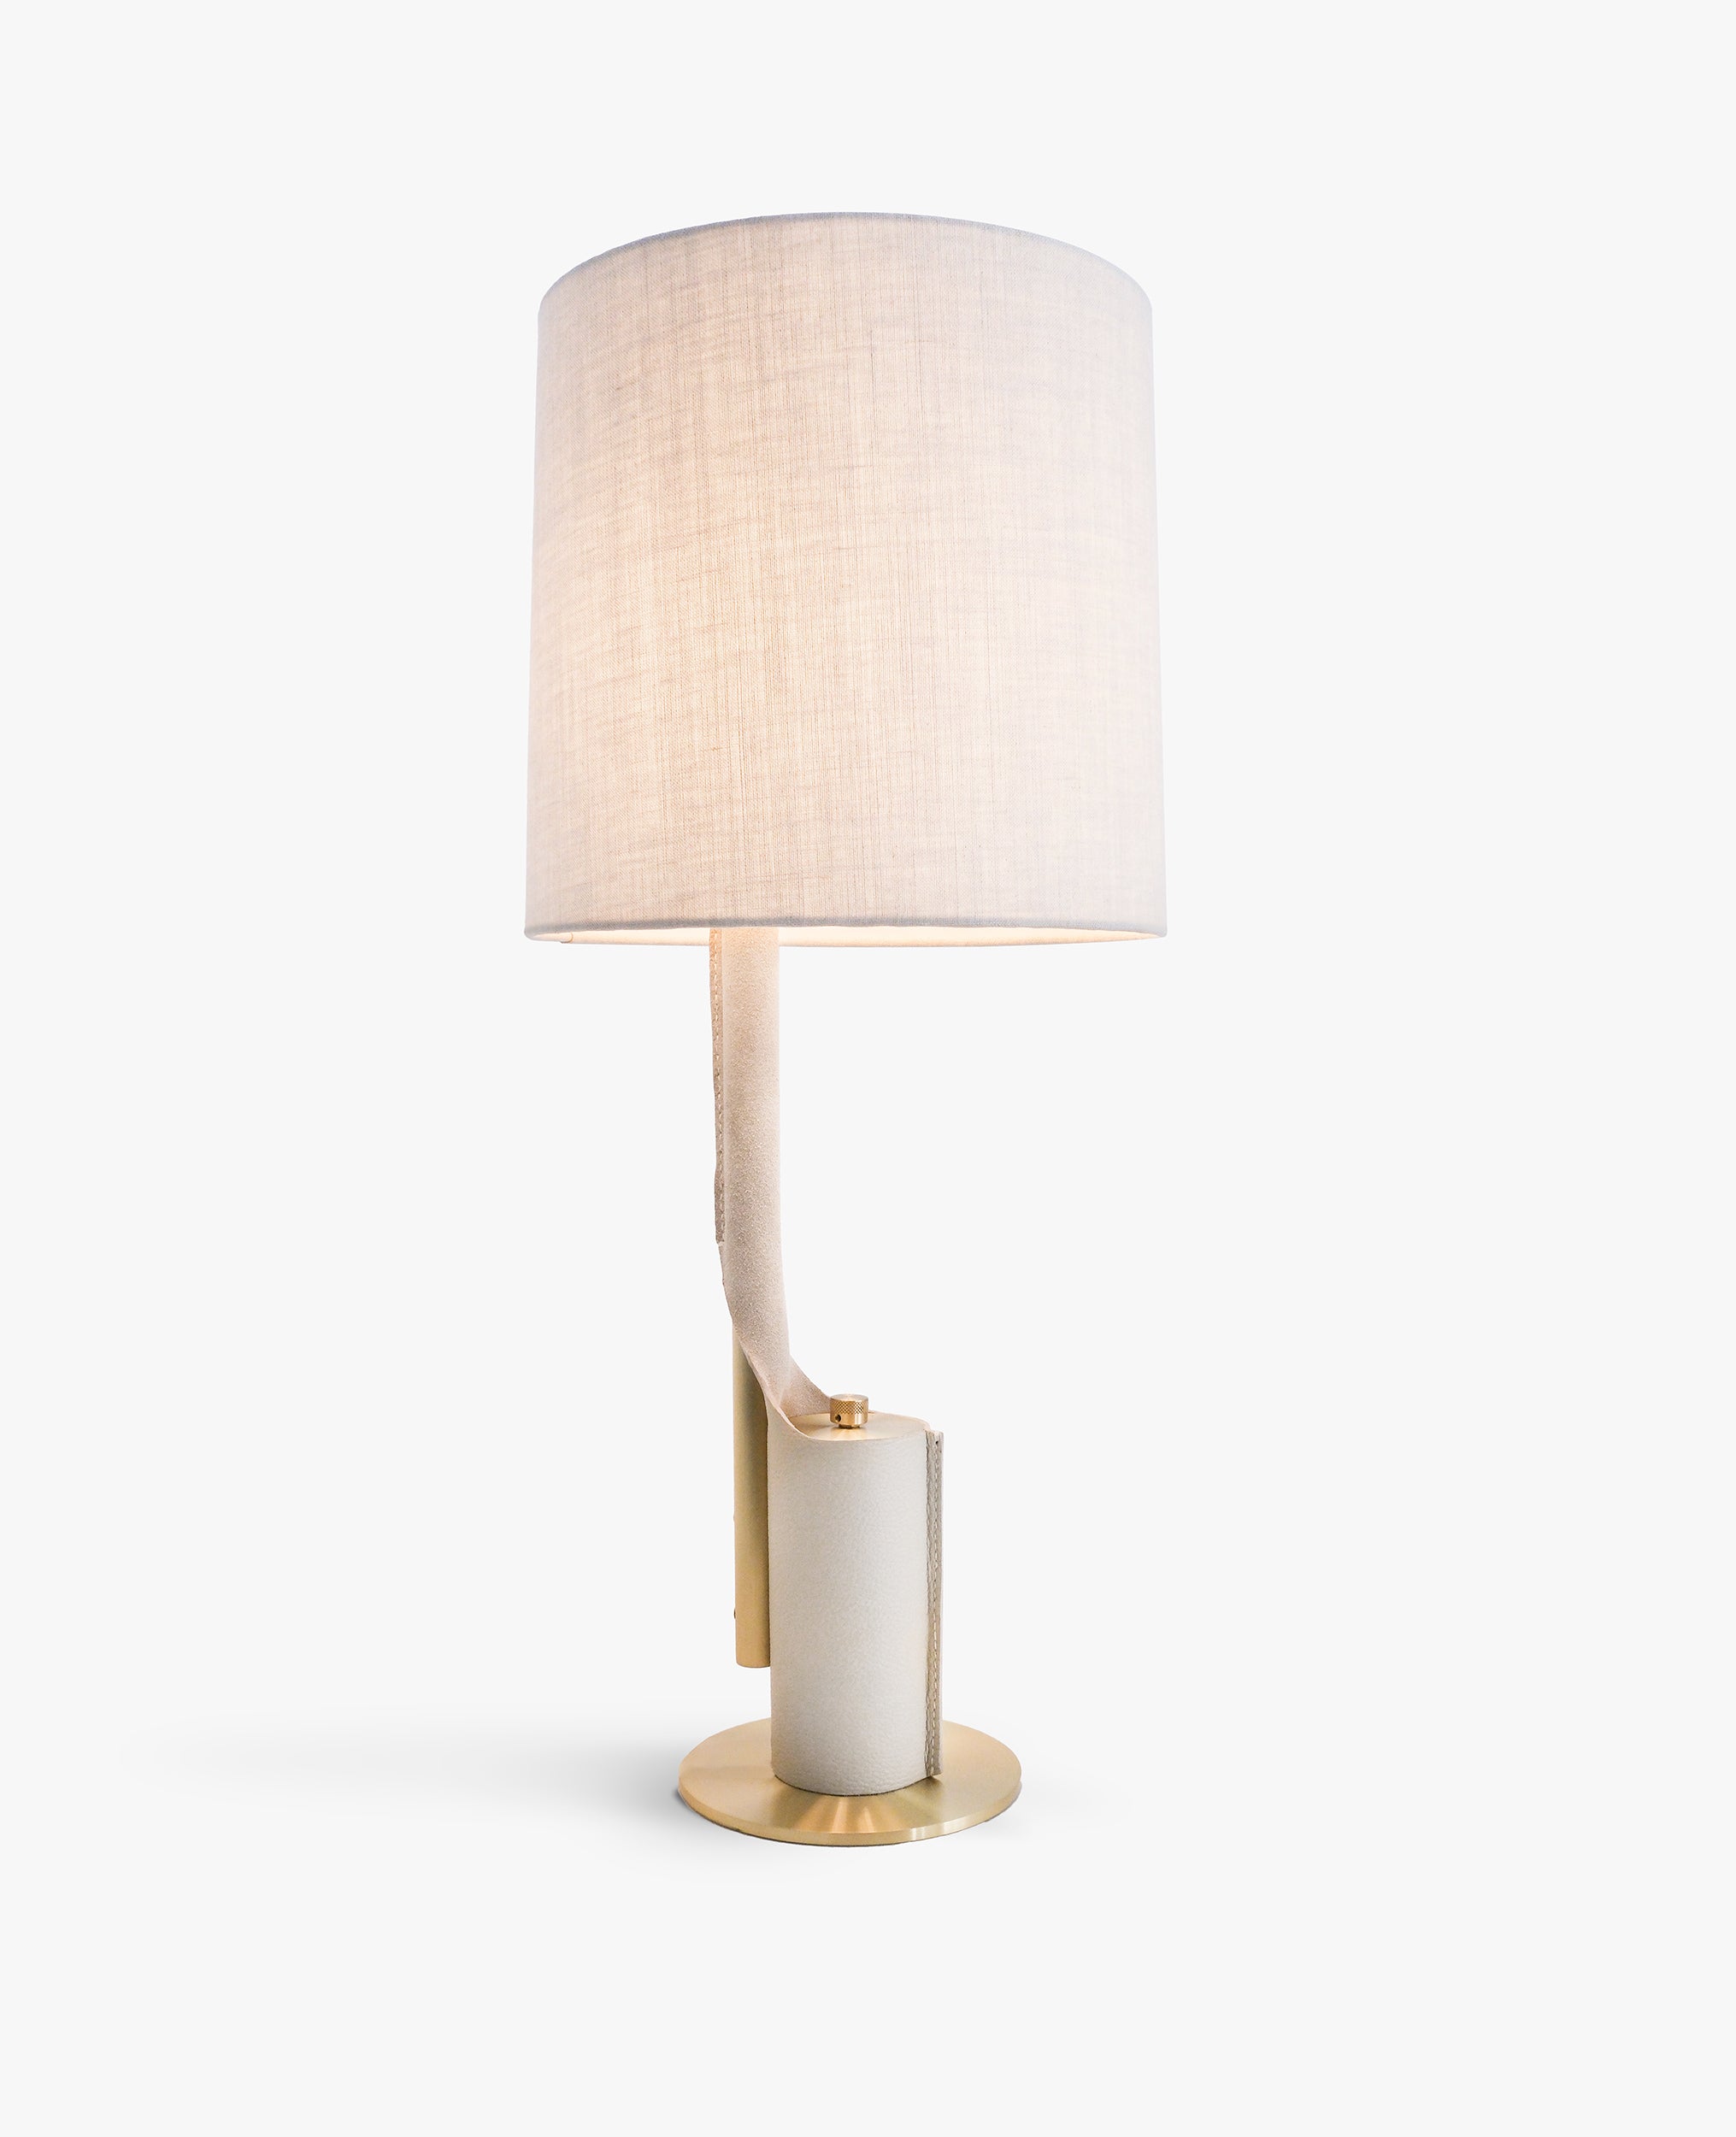 Brushed Brass w/ Cream Leather and Natural Linen Shade